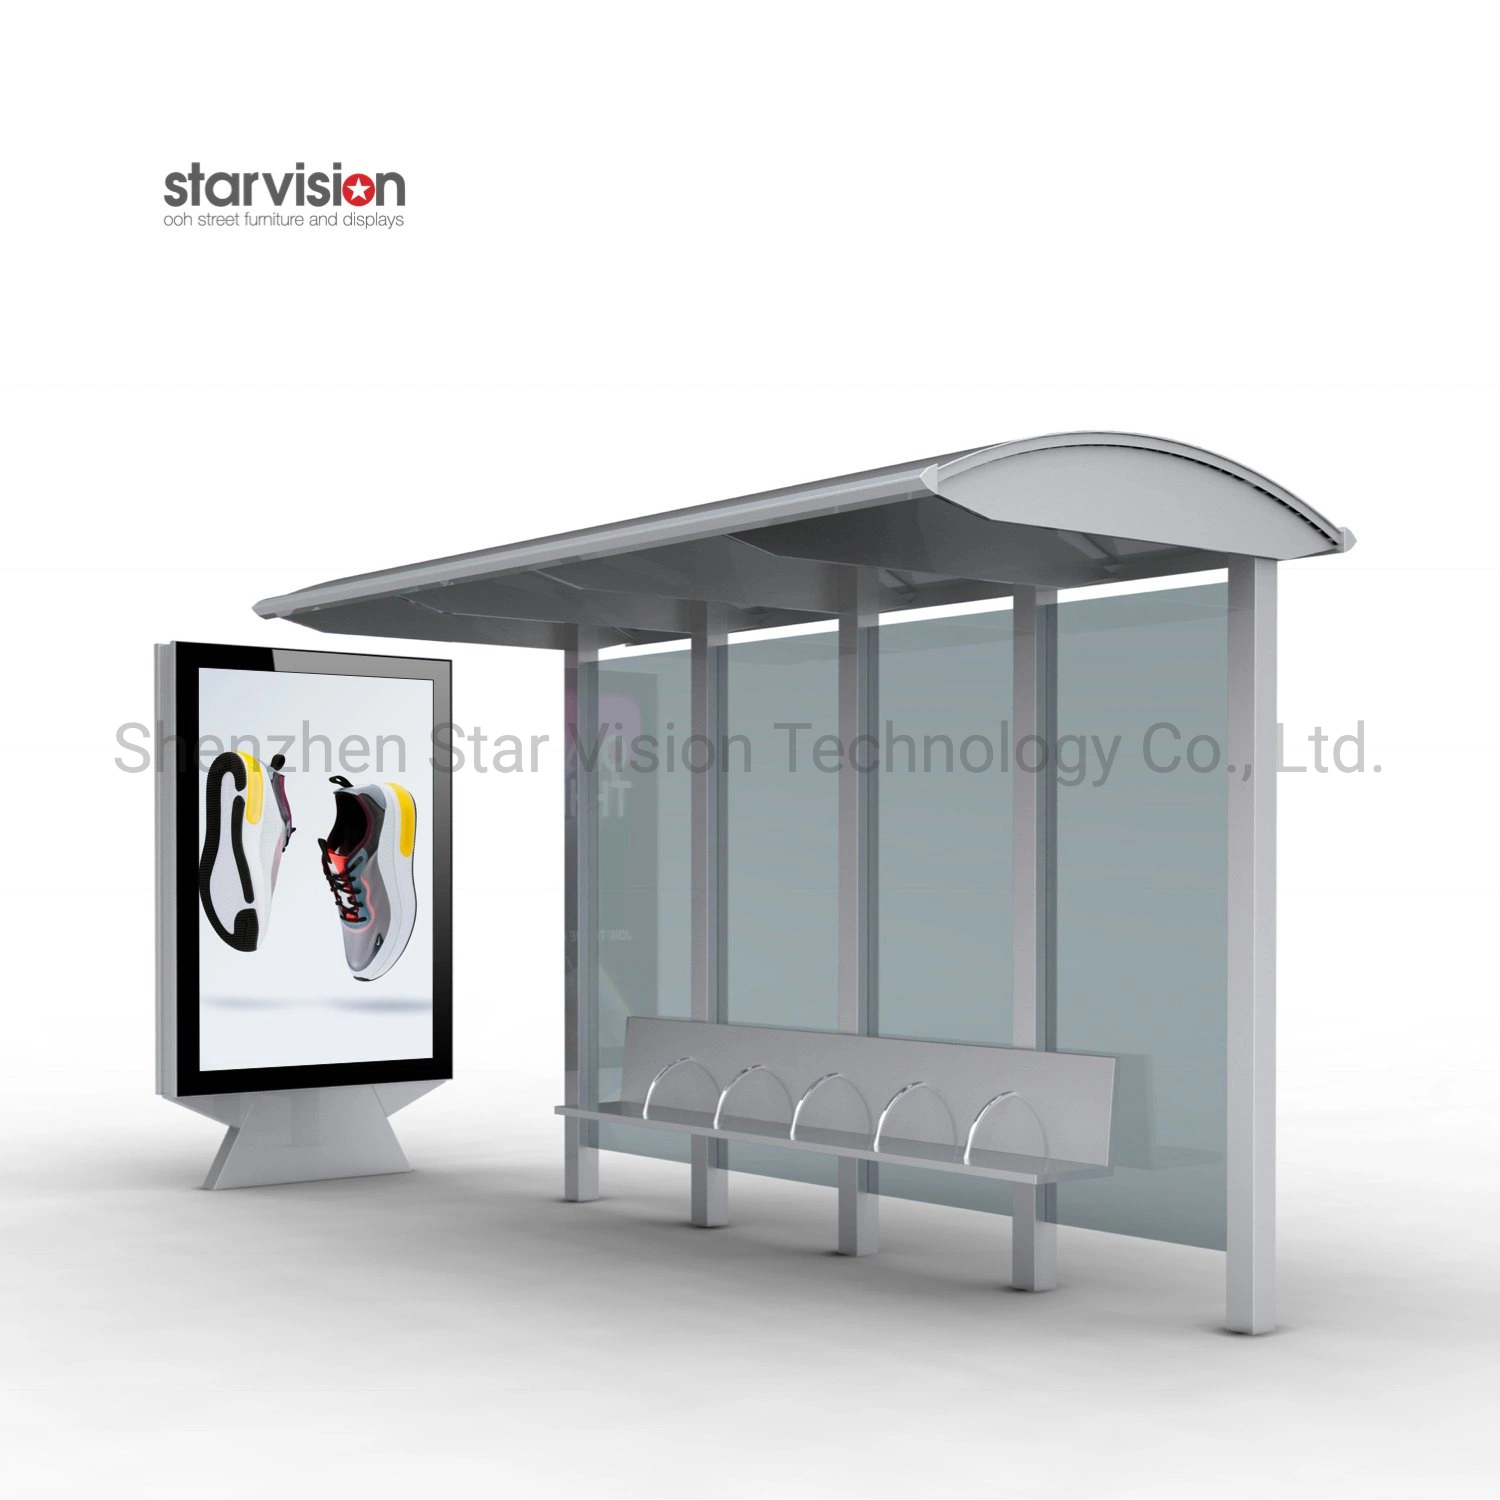 Urban Street Bus Stop with LED Illumination for Commuter